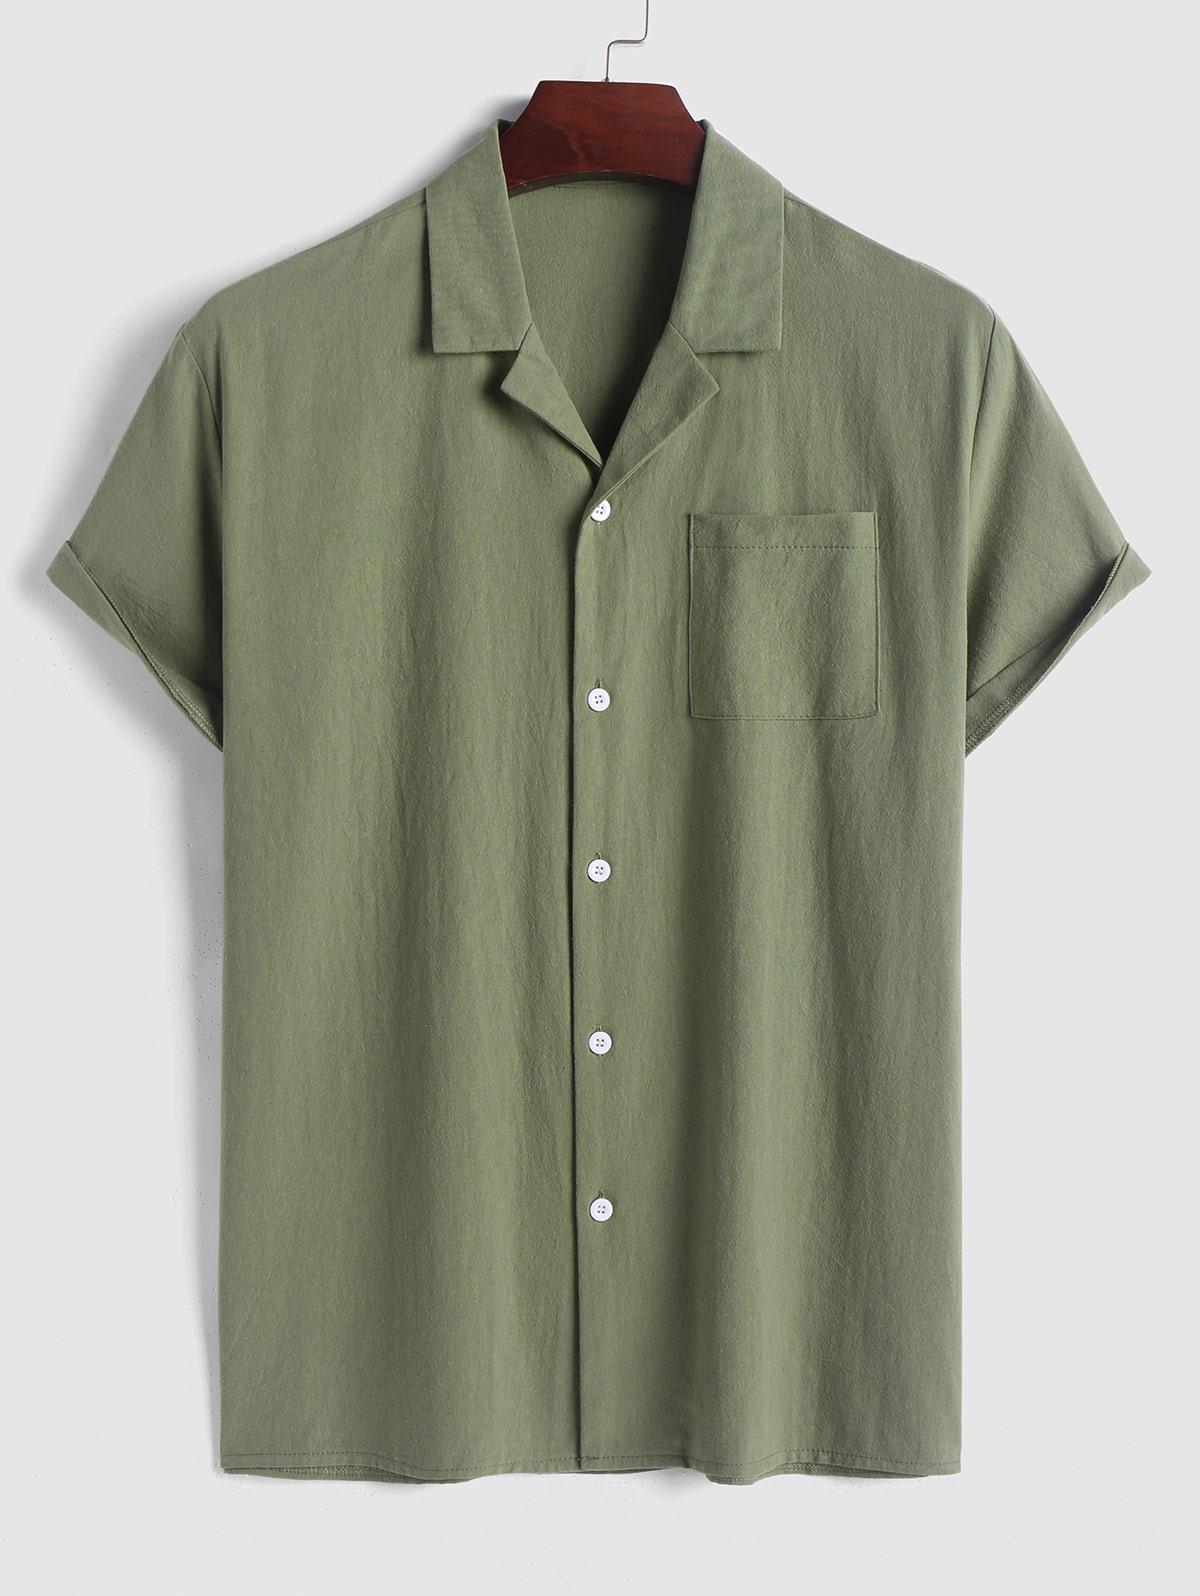 ZAFUL Men's ZAFUL Solid Color Cotton and Linen Textured Front Pocket Design Shirt L Light green